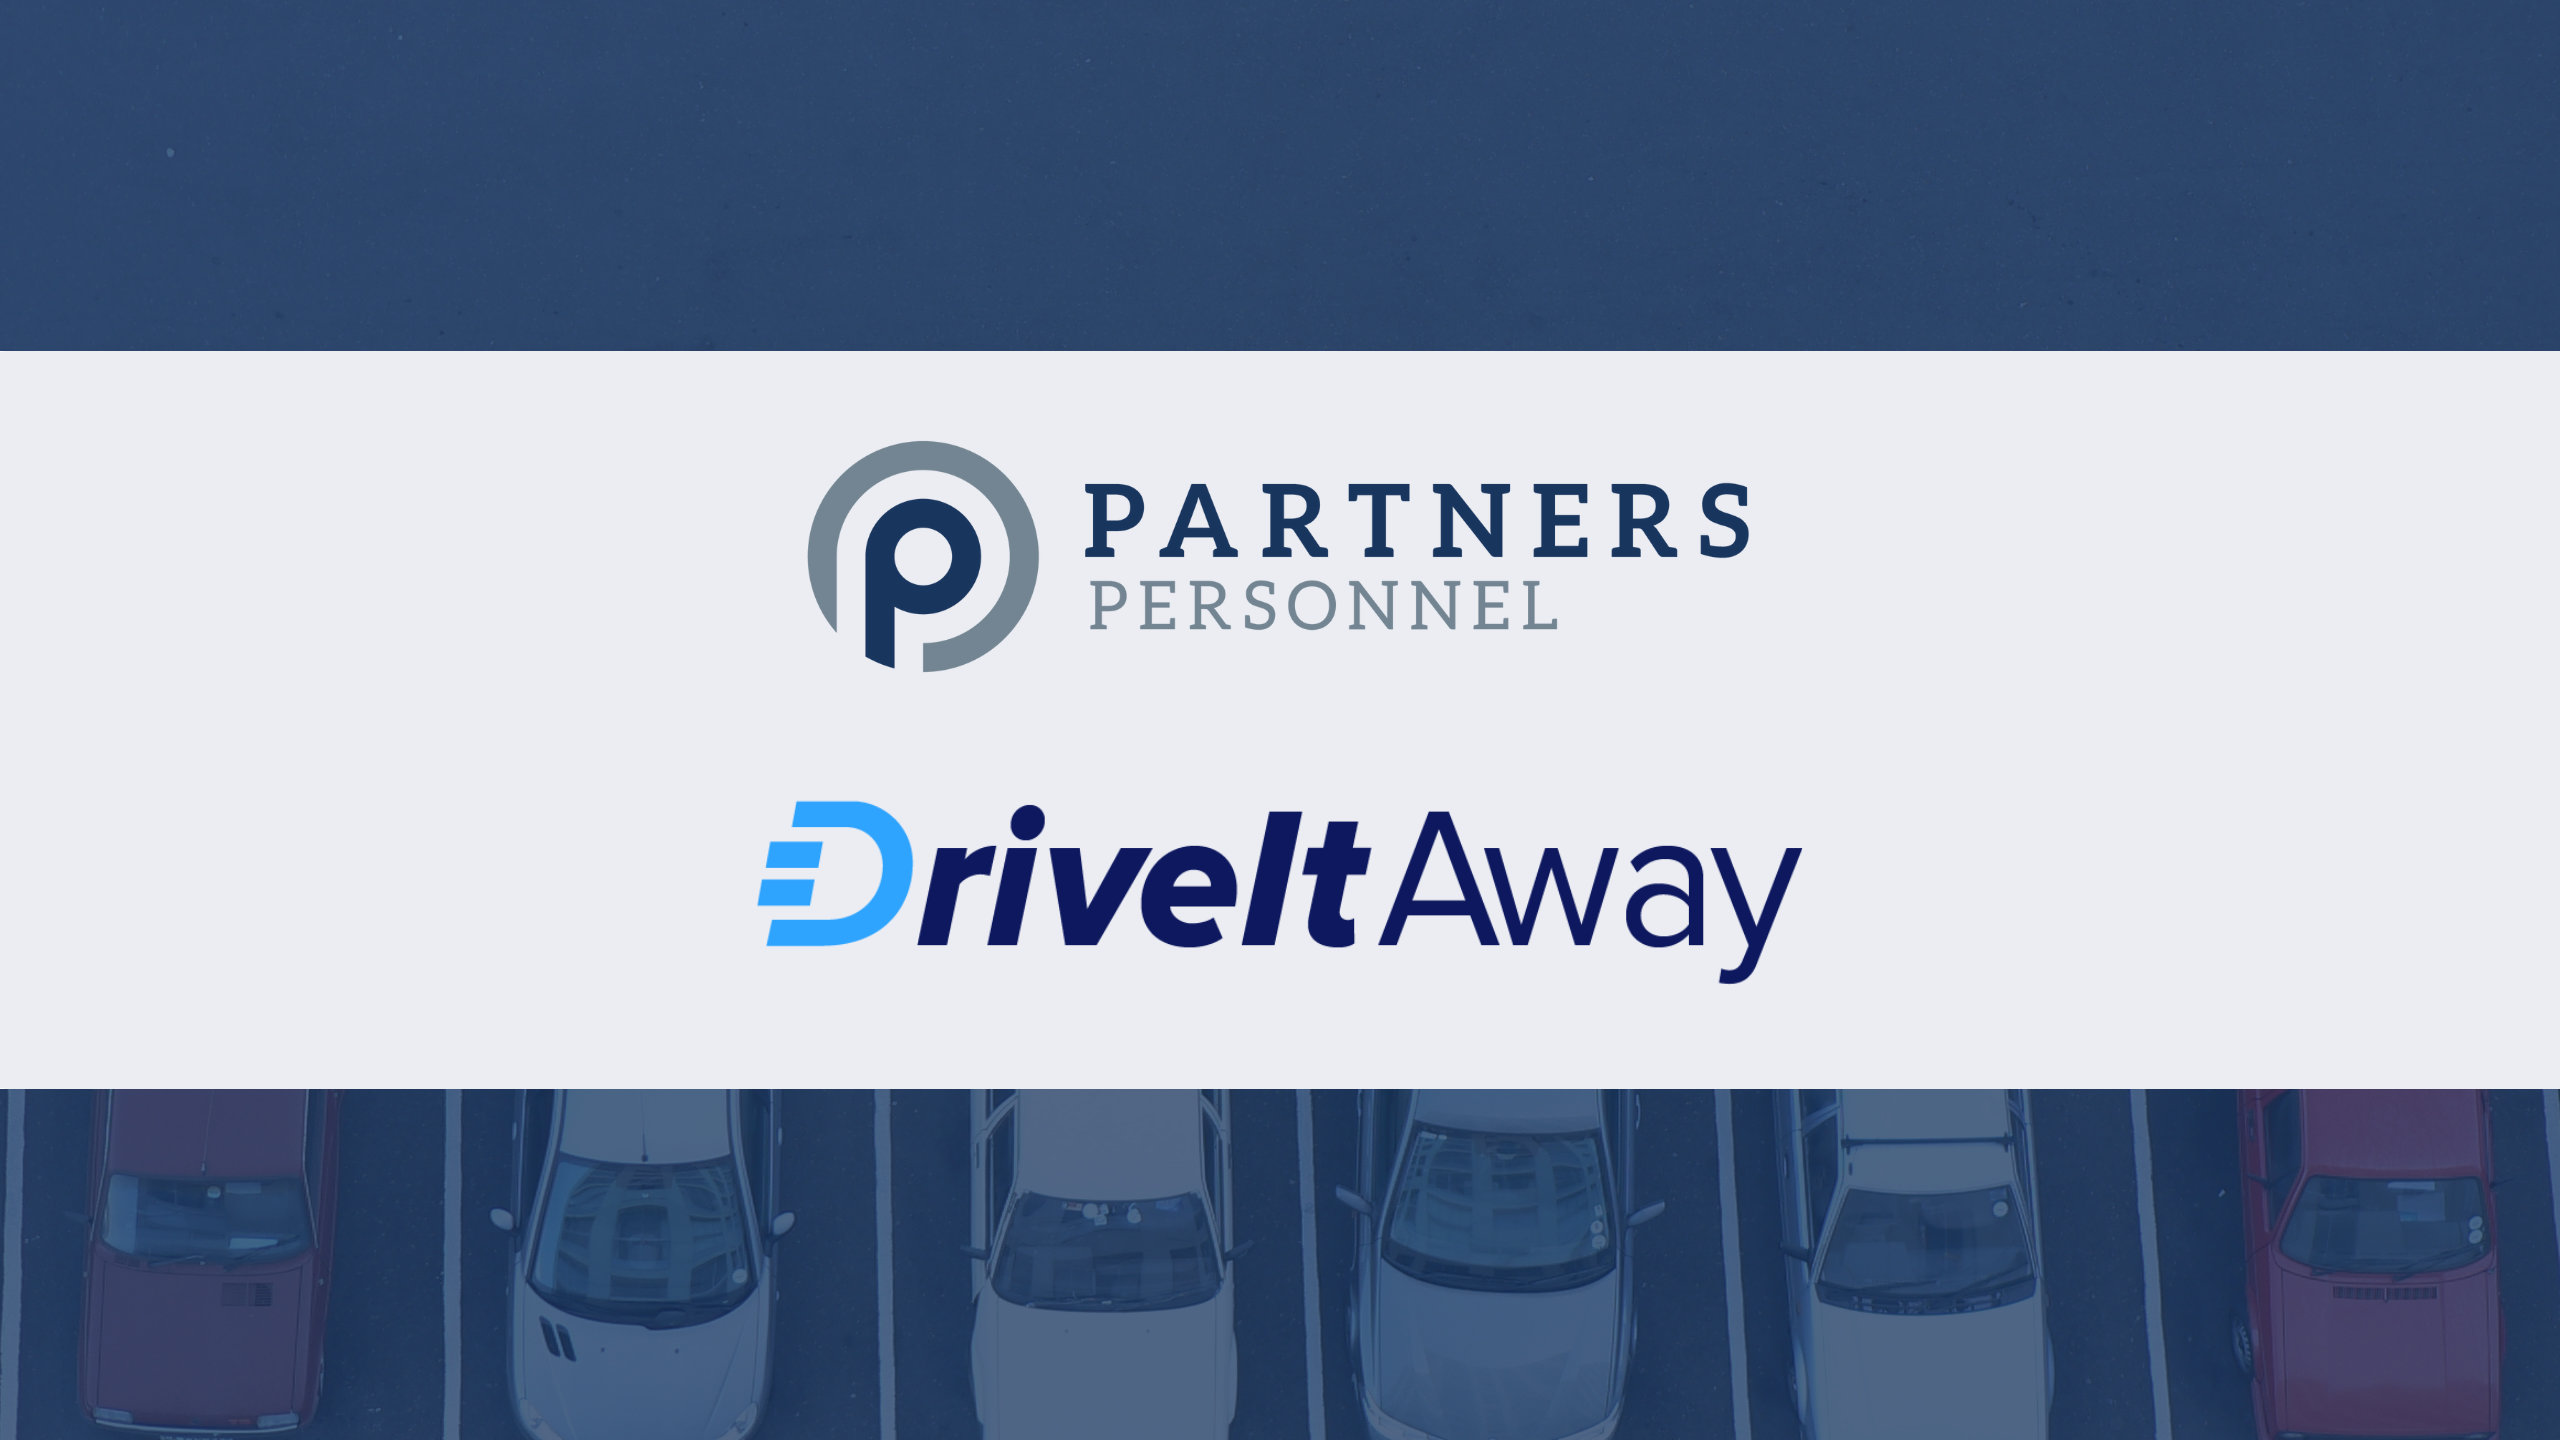 Partners Personnel Partners With DriveItAway To Provide Affordable, Quality Transportation For All While Auto Loan Application Rejection Reaches An All-Time High